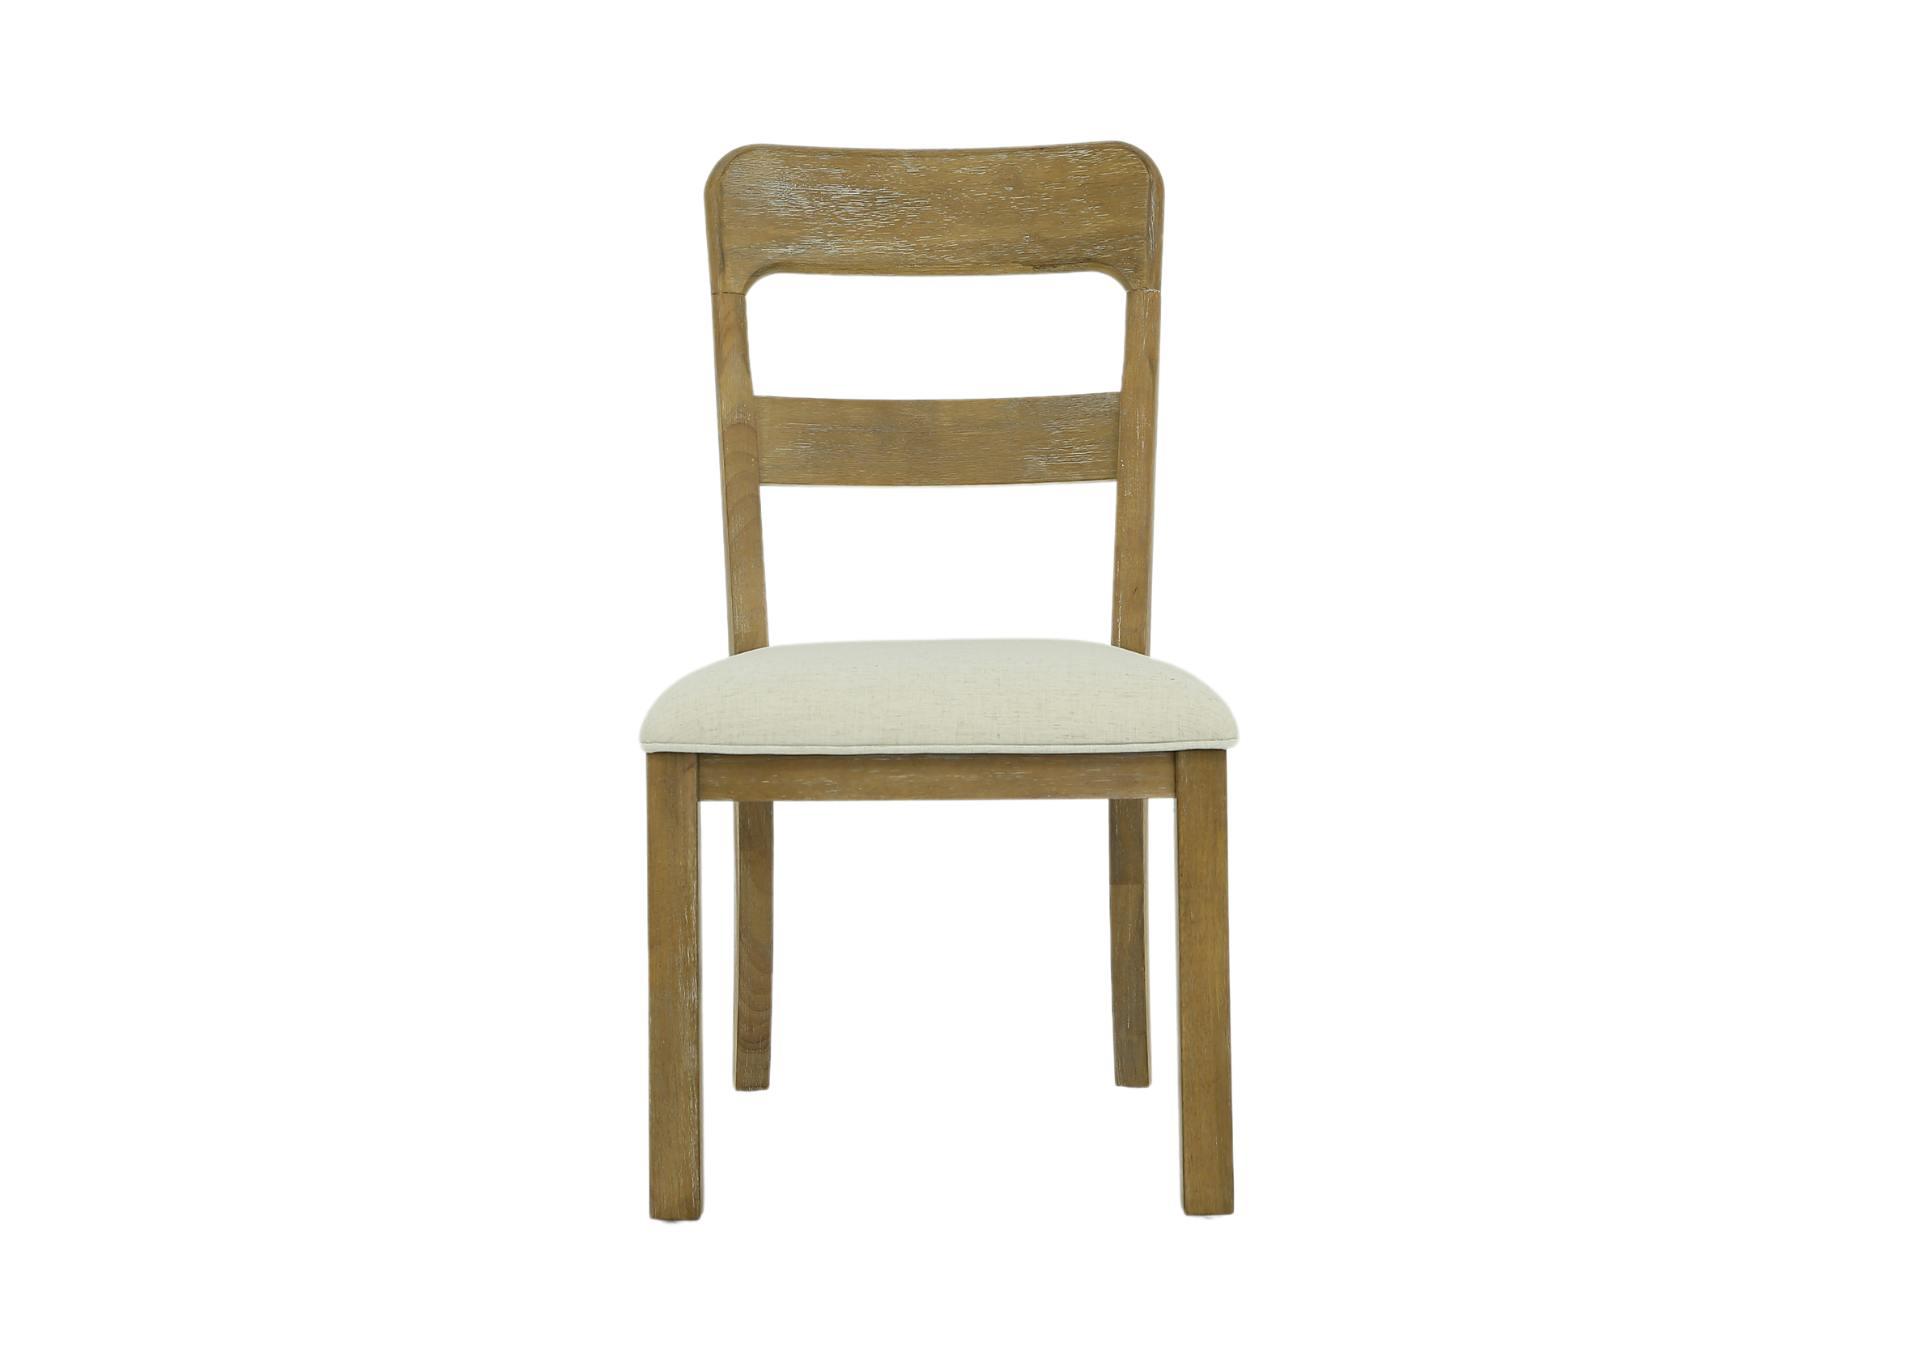 LYNNFIELD SIDE CHAIR,MAGS